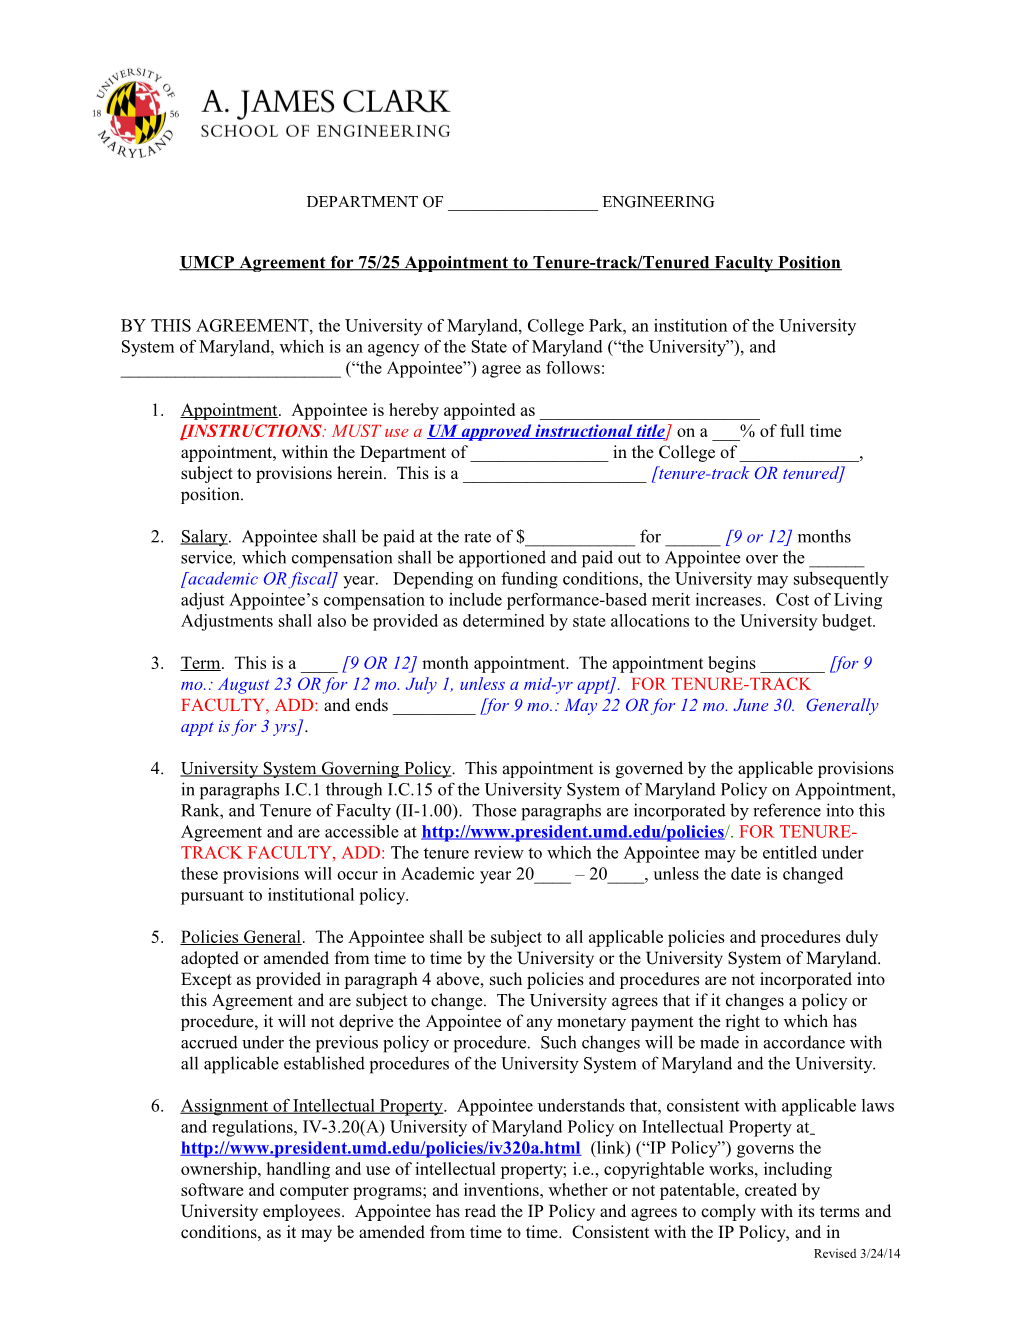 UMCP Agreement for Appointment to Tenured/Tenure-Track Faculty Position